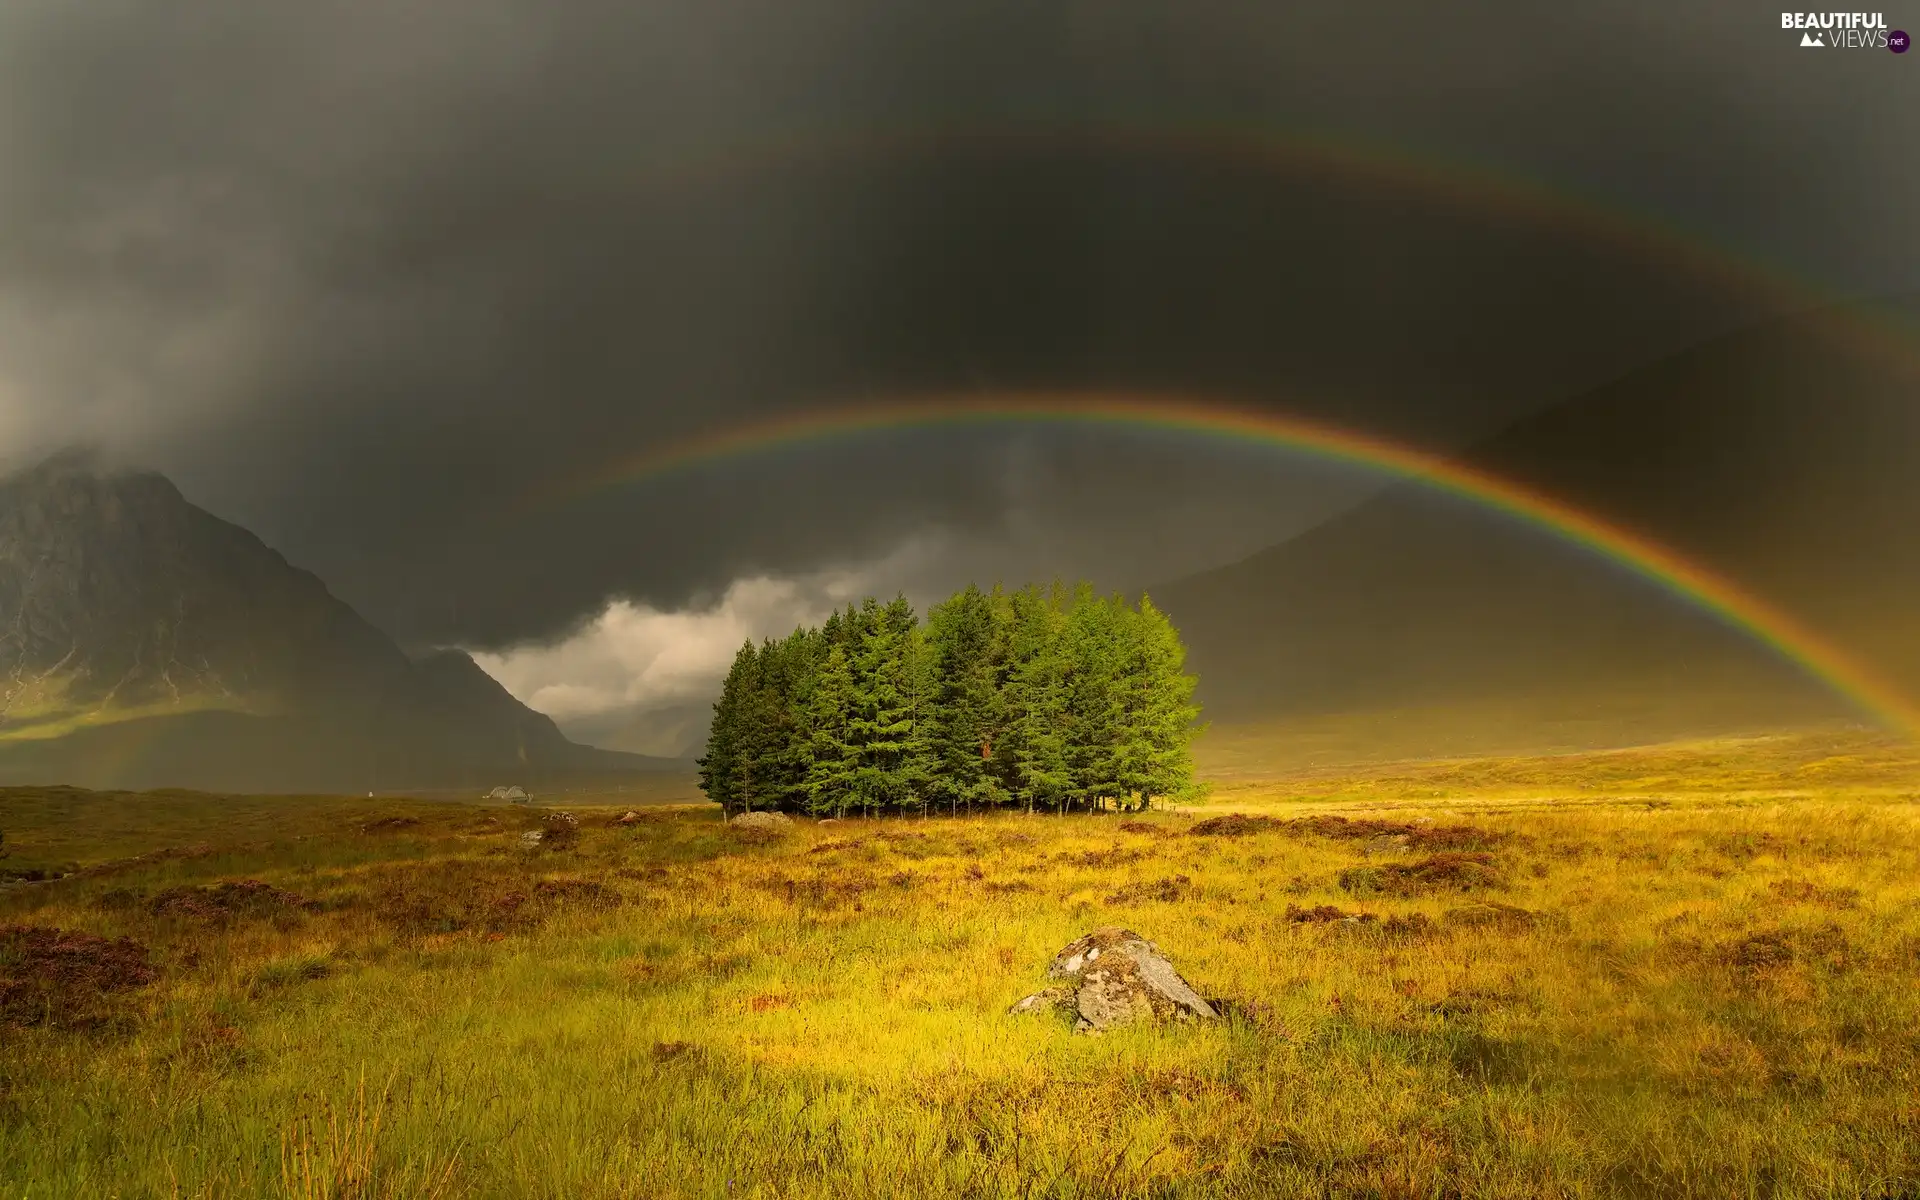 Mountains, trees, viewes, Great Rainbows